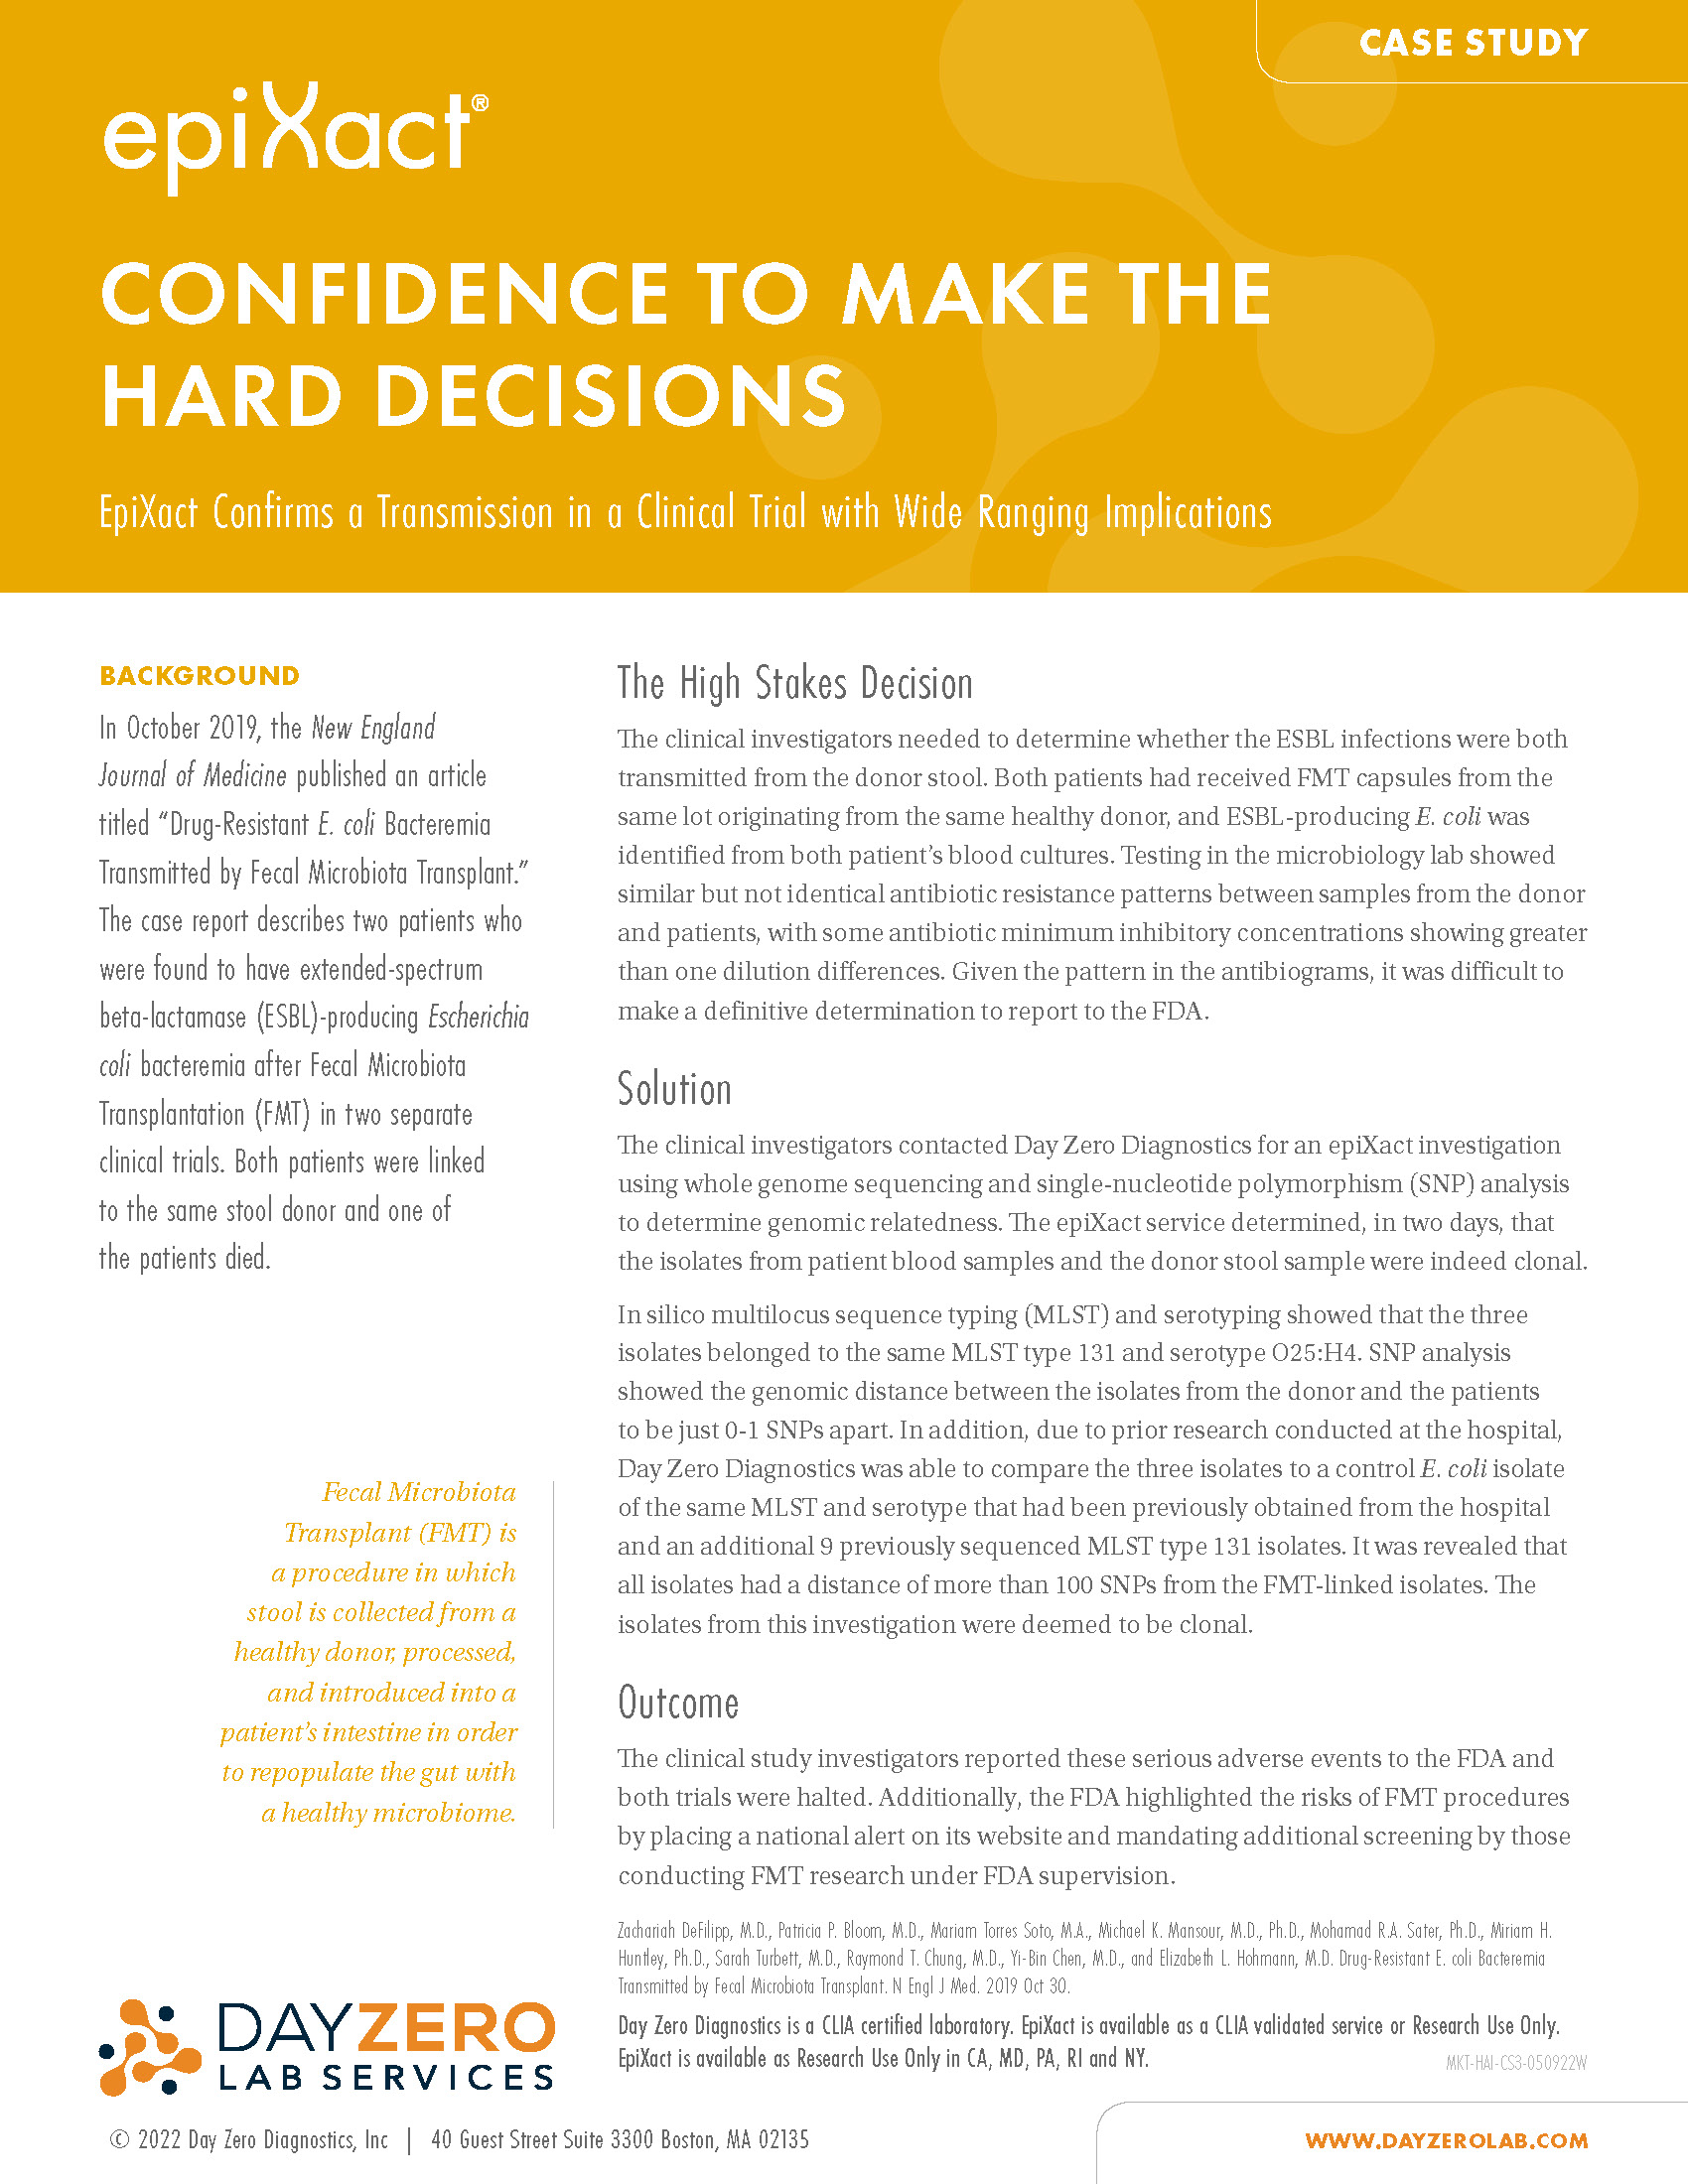 Case Study: Confidence to Make the Hard Decisions